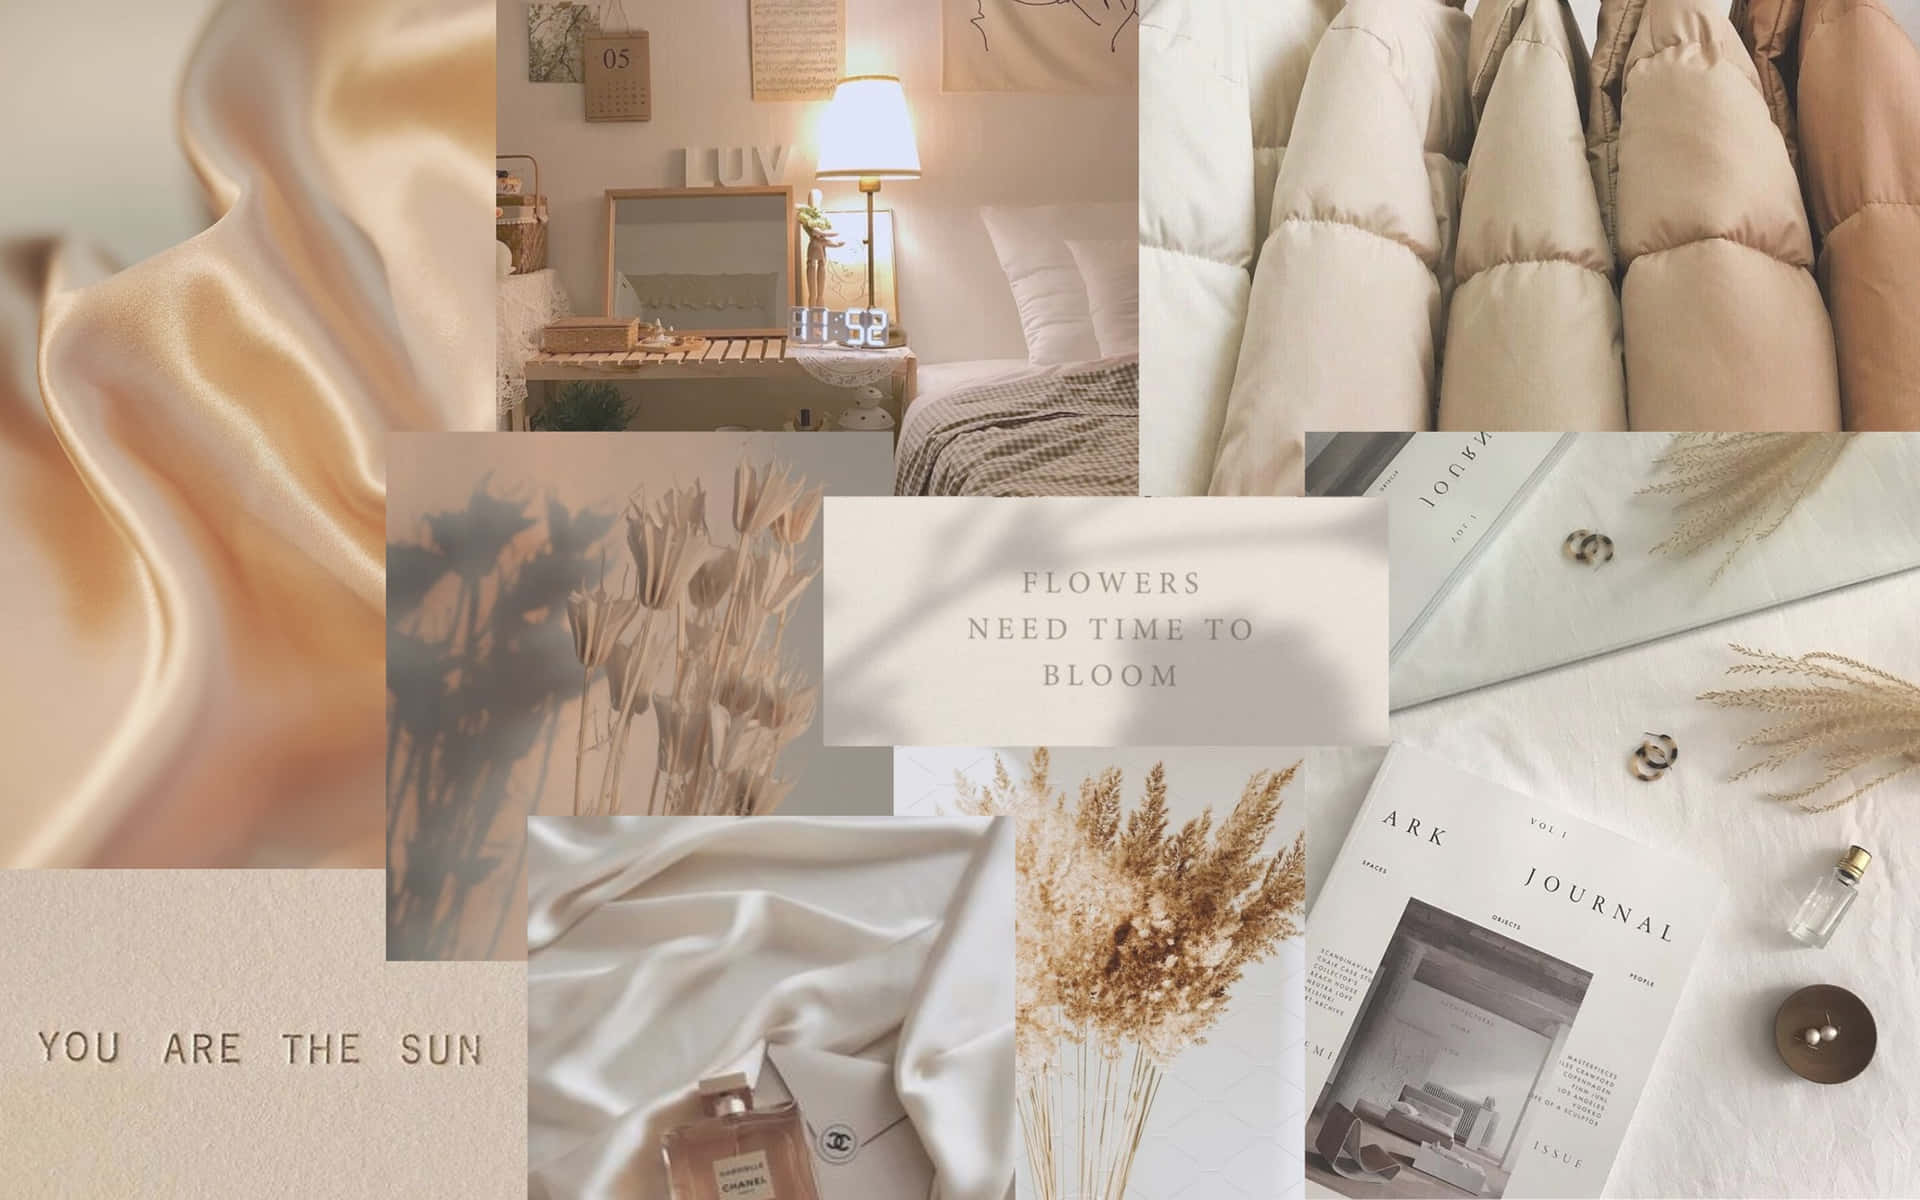 A Collage Of Various Items Including A Bed, Pillows, And A Lamp